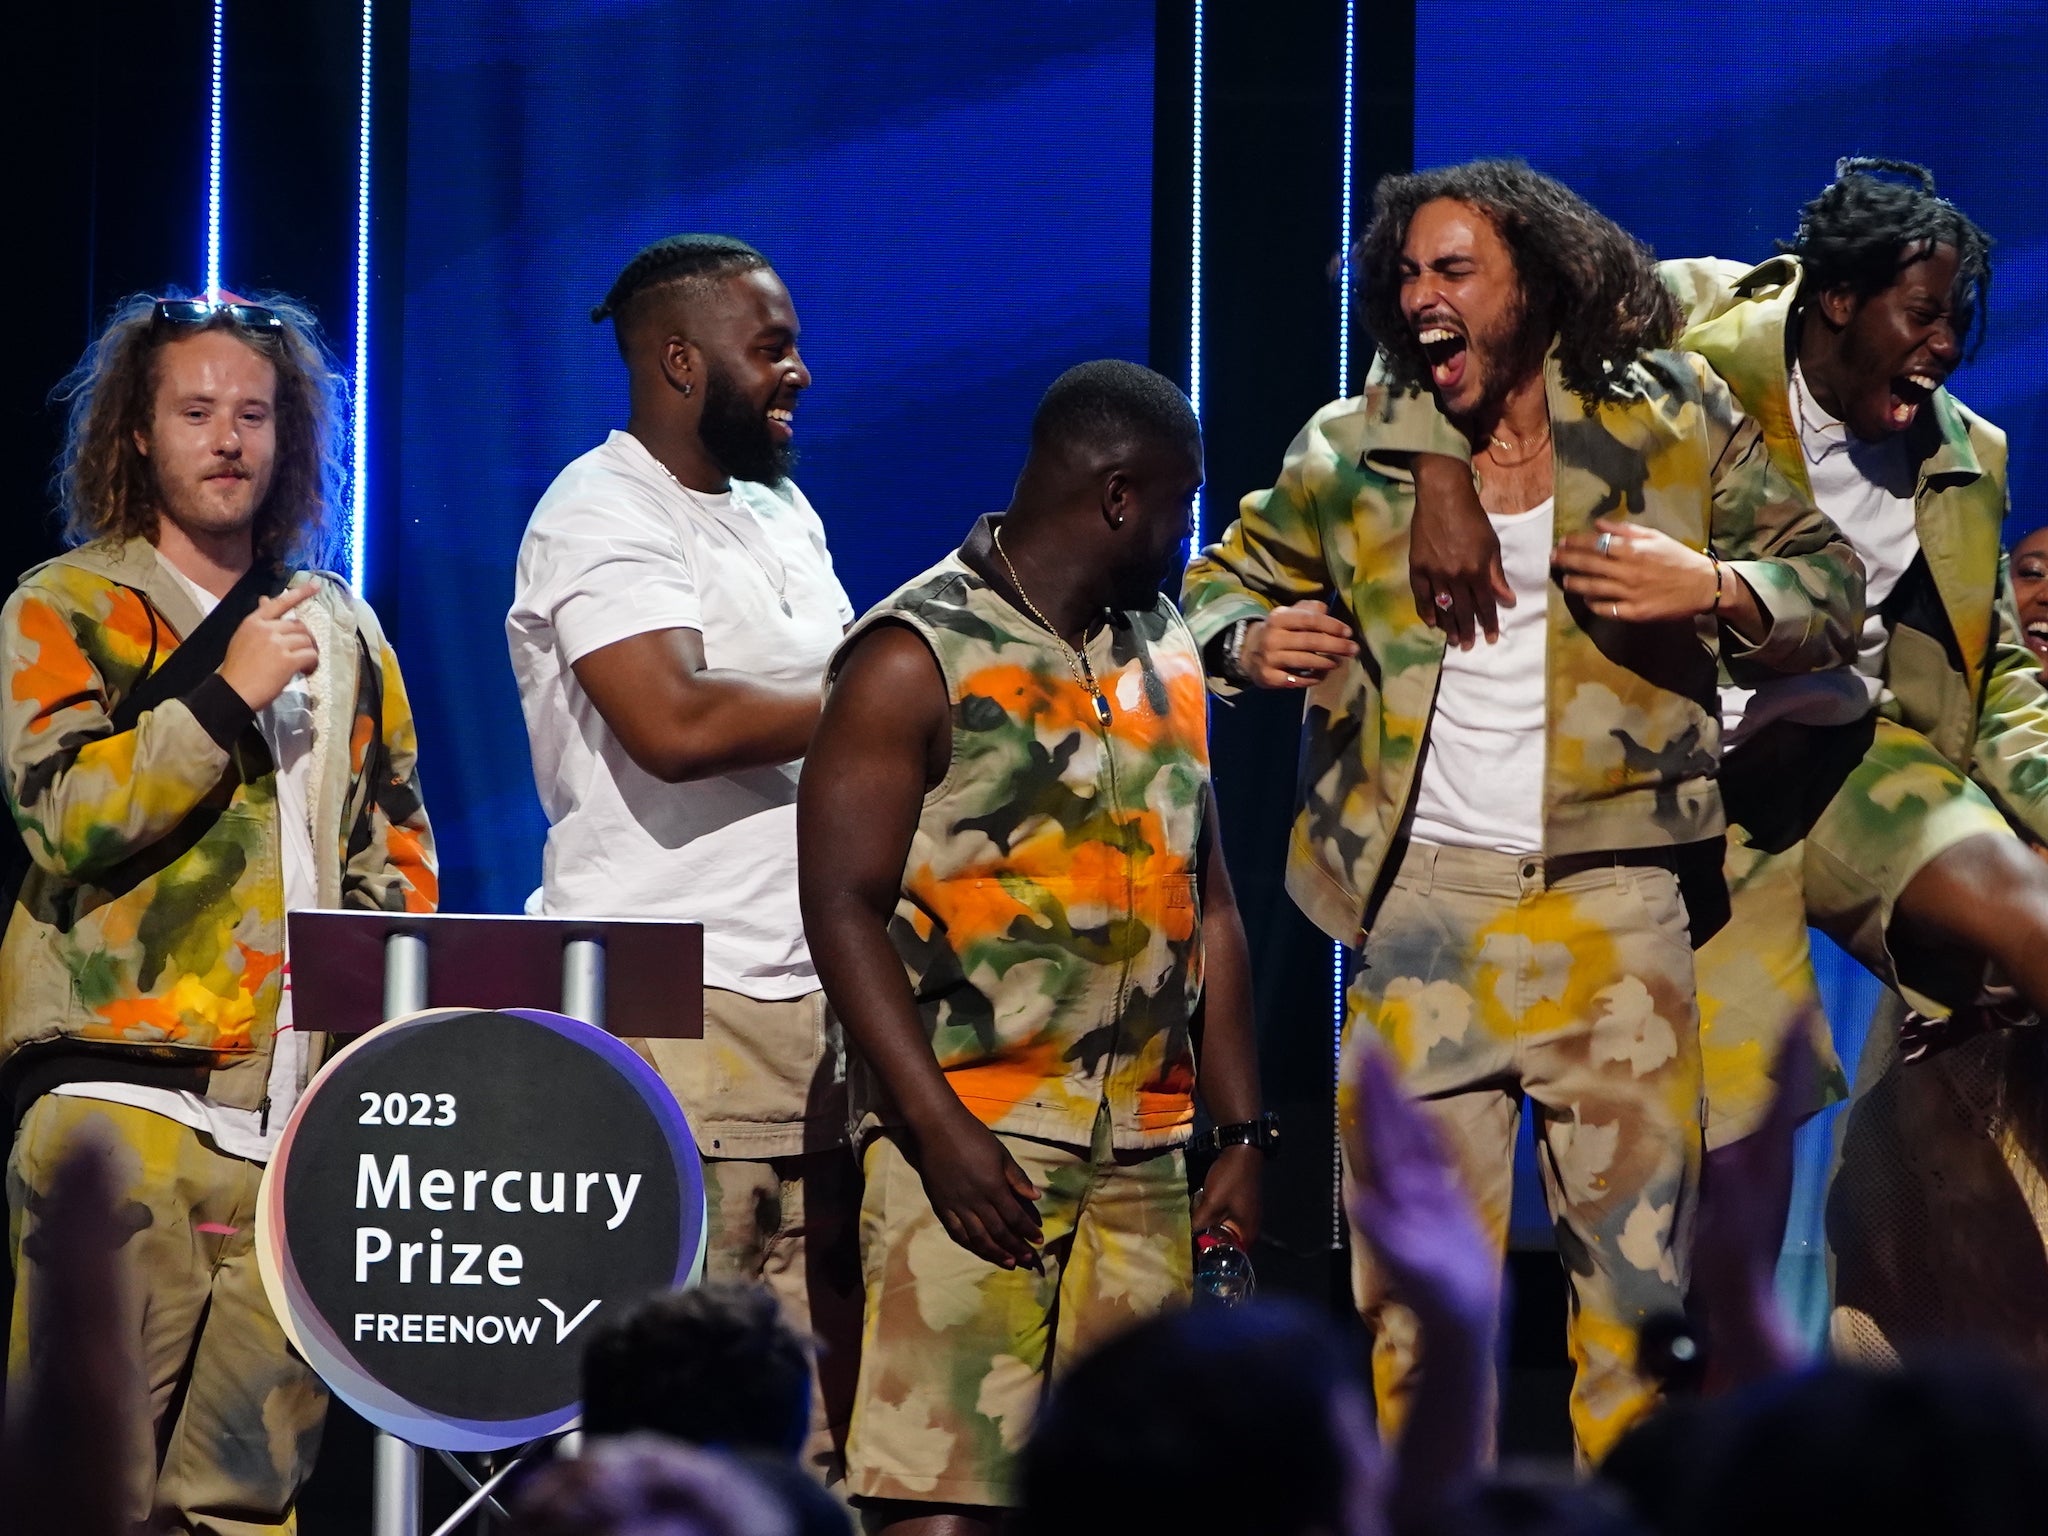 The group celebrate on stage after winning the 2023 Mercury Prize award